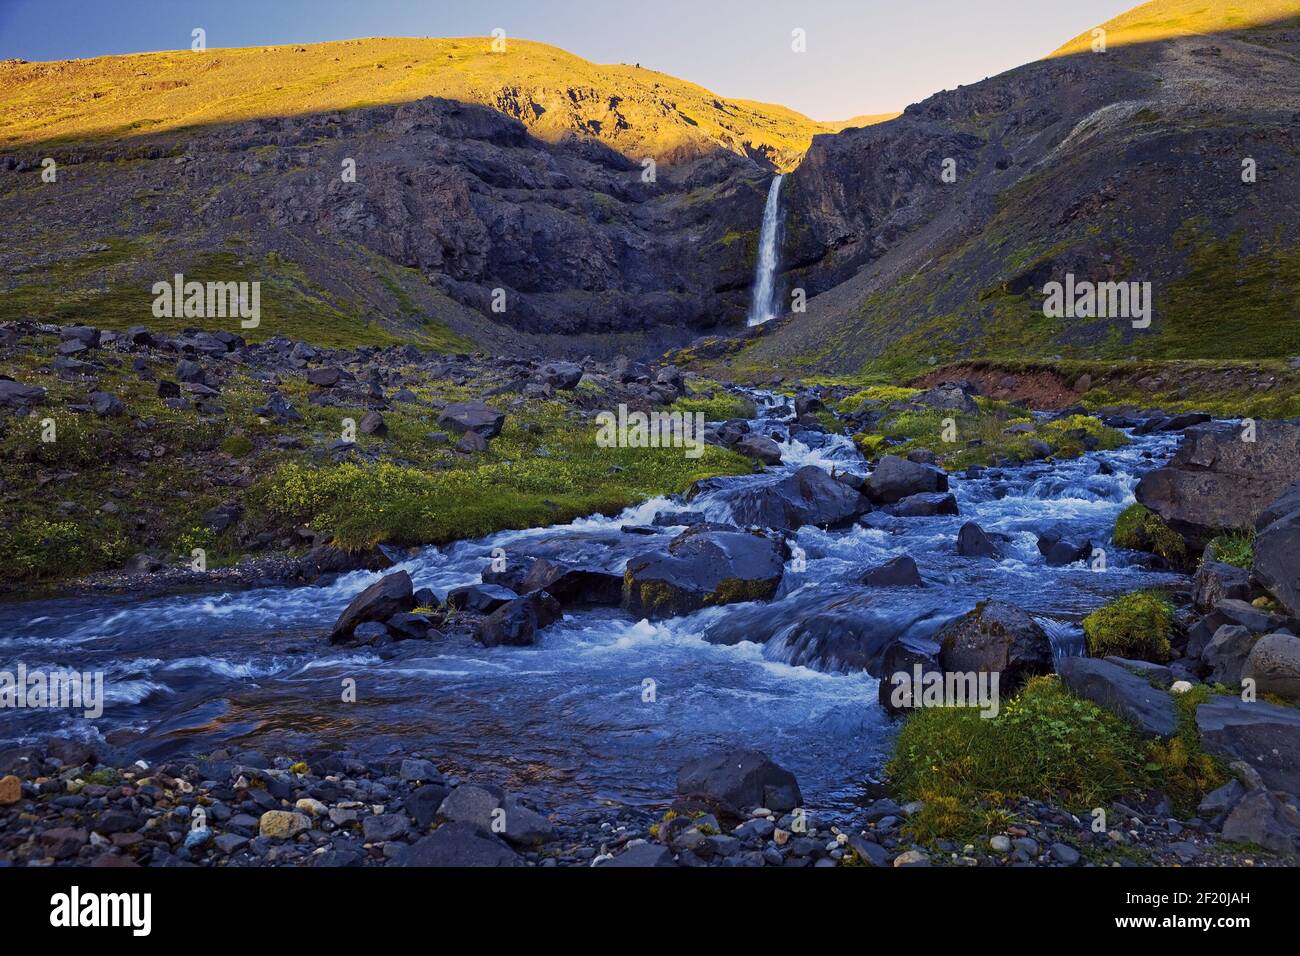 River GilsÃ¡ with waterfall in the valley of the mountain Hoettur and Sandfell, Iceland, Europe Stock Photo